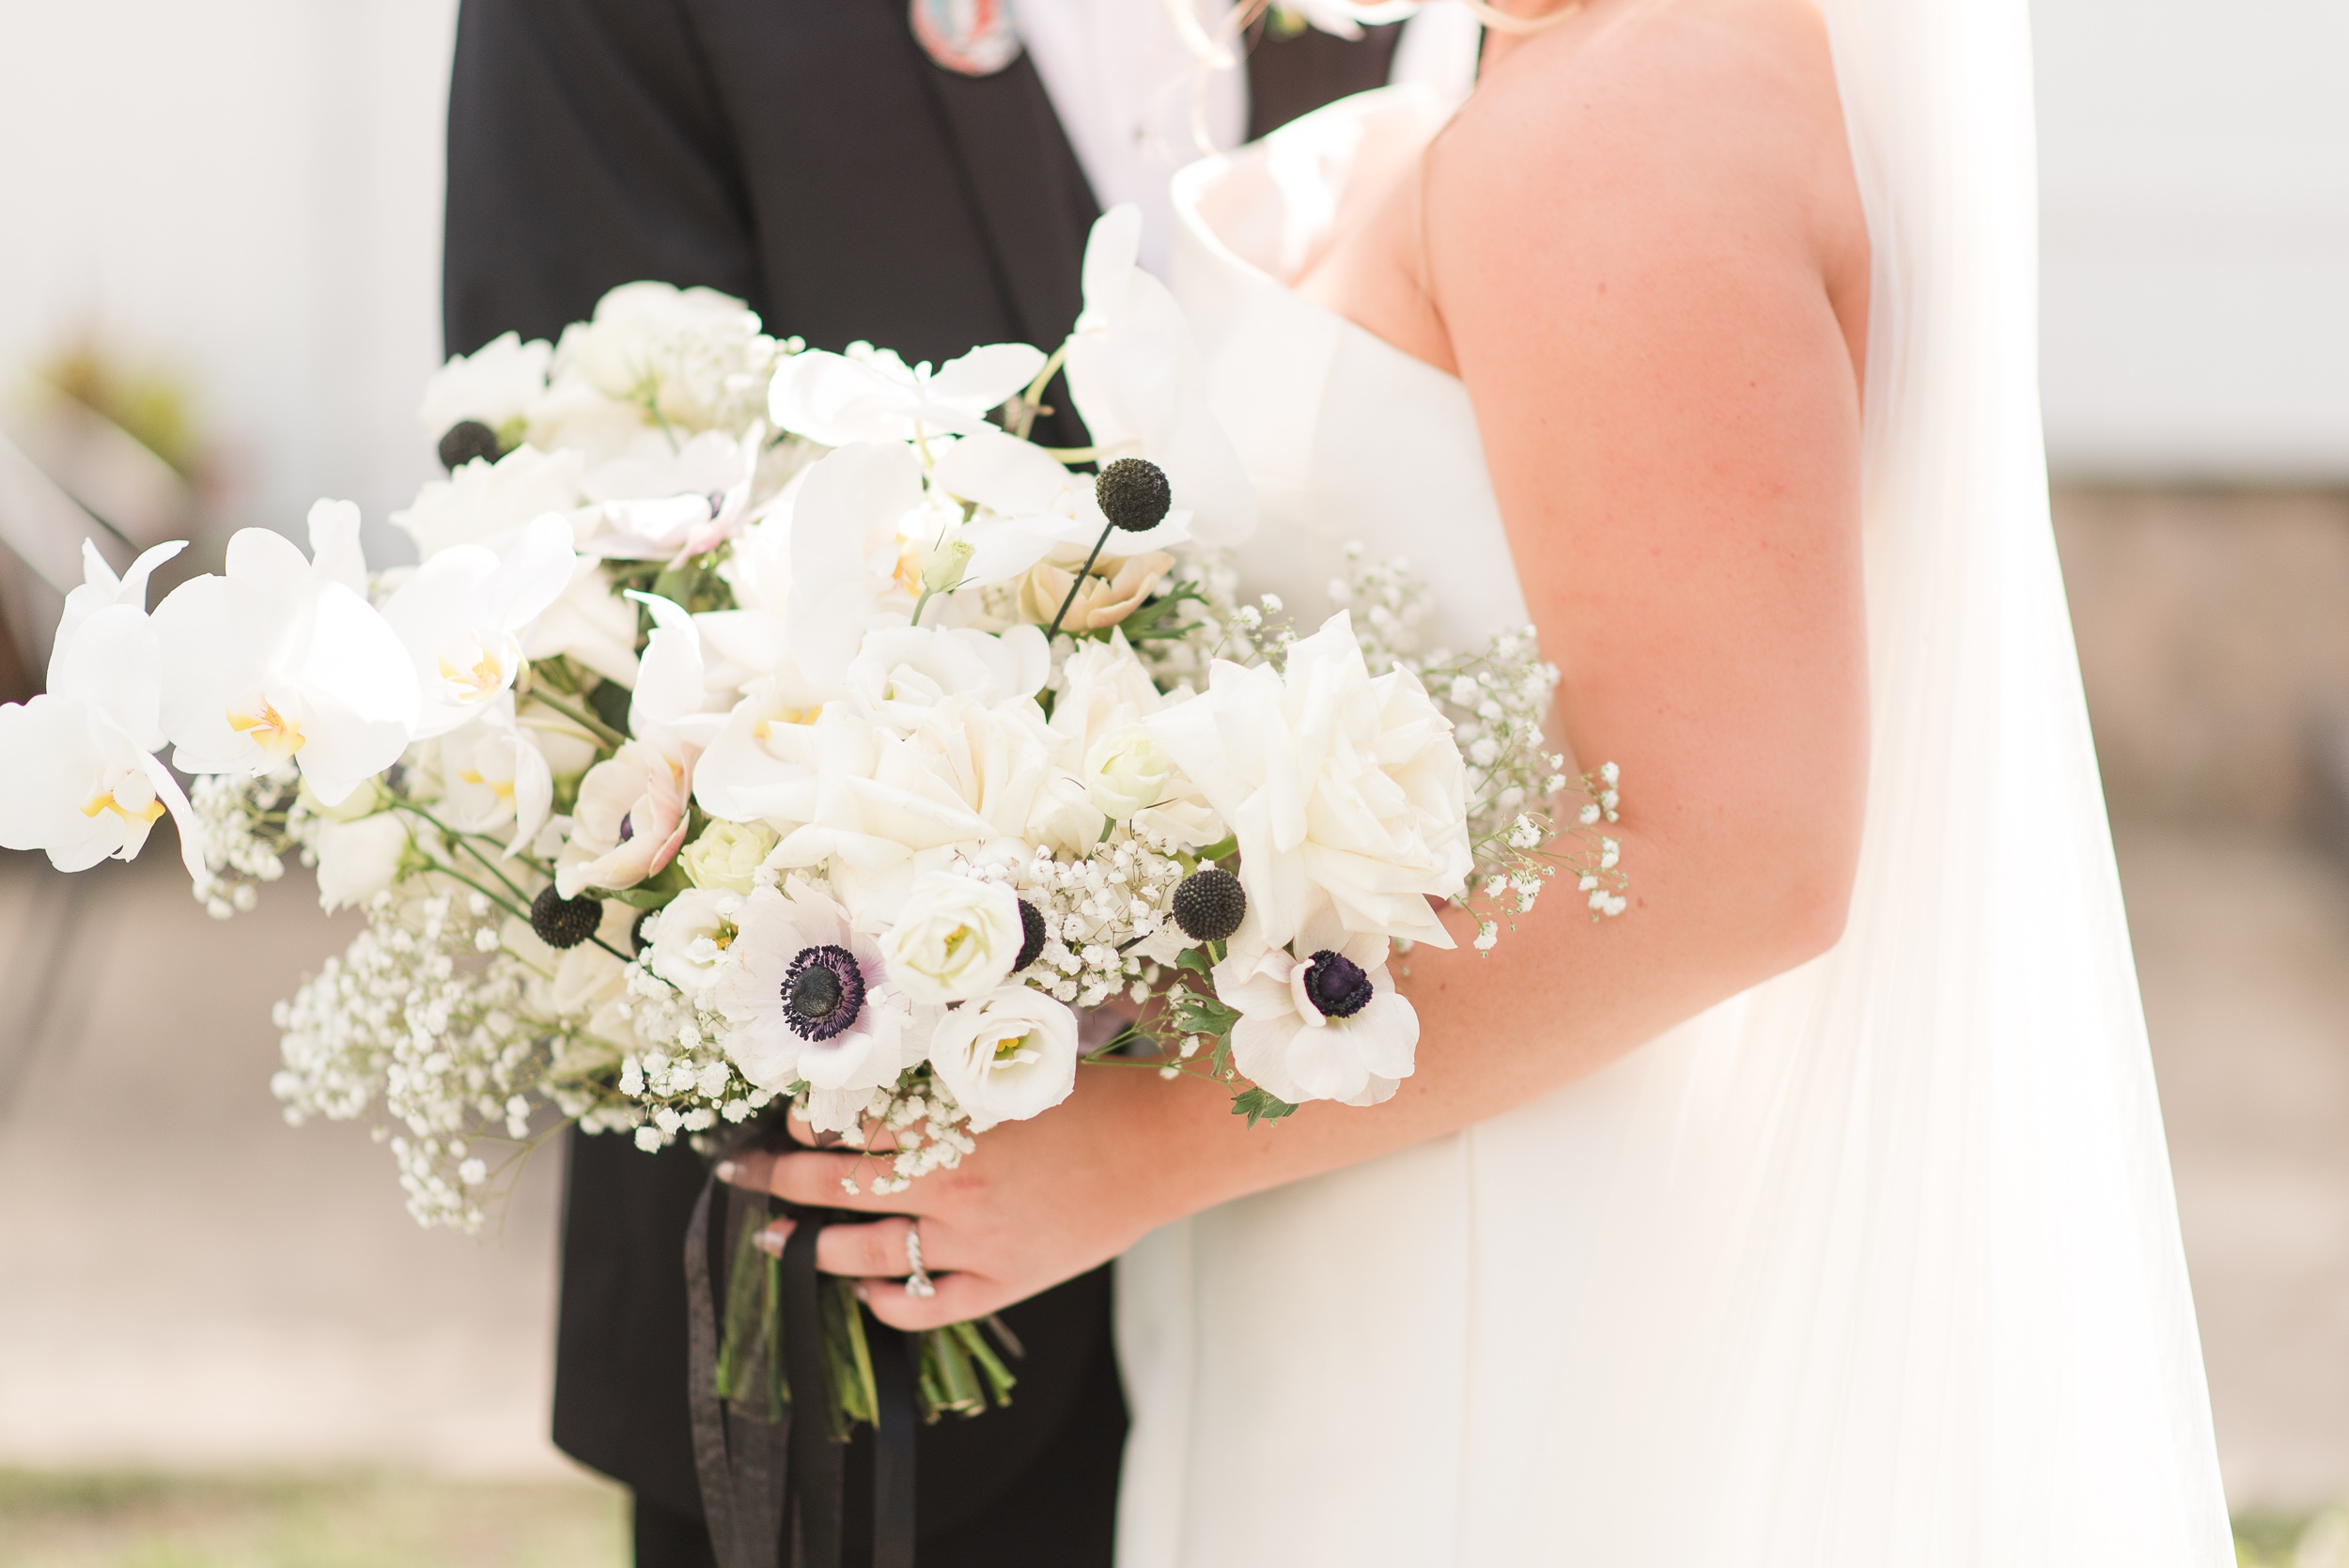 Details of a brides white and black bouquet in her hand